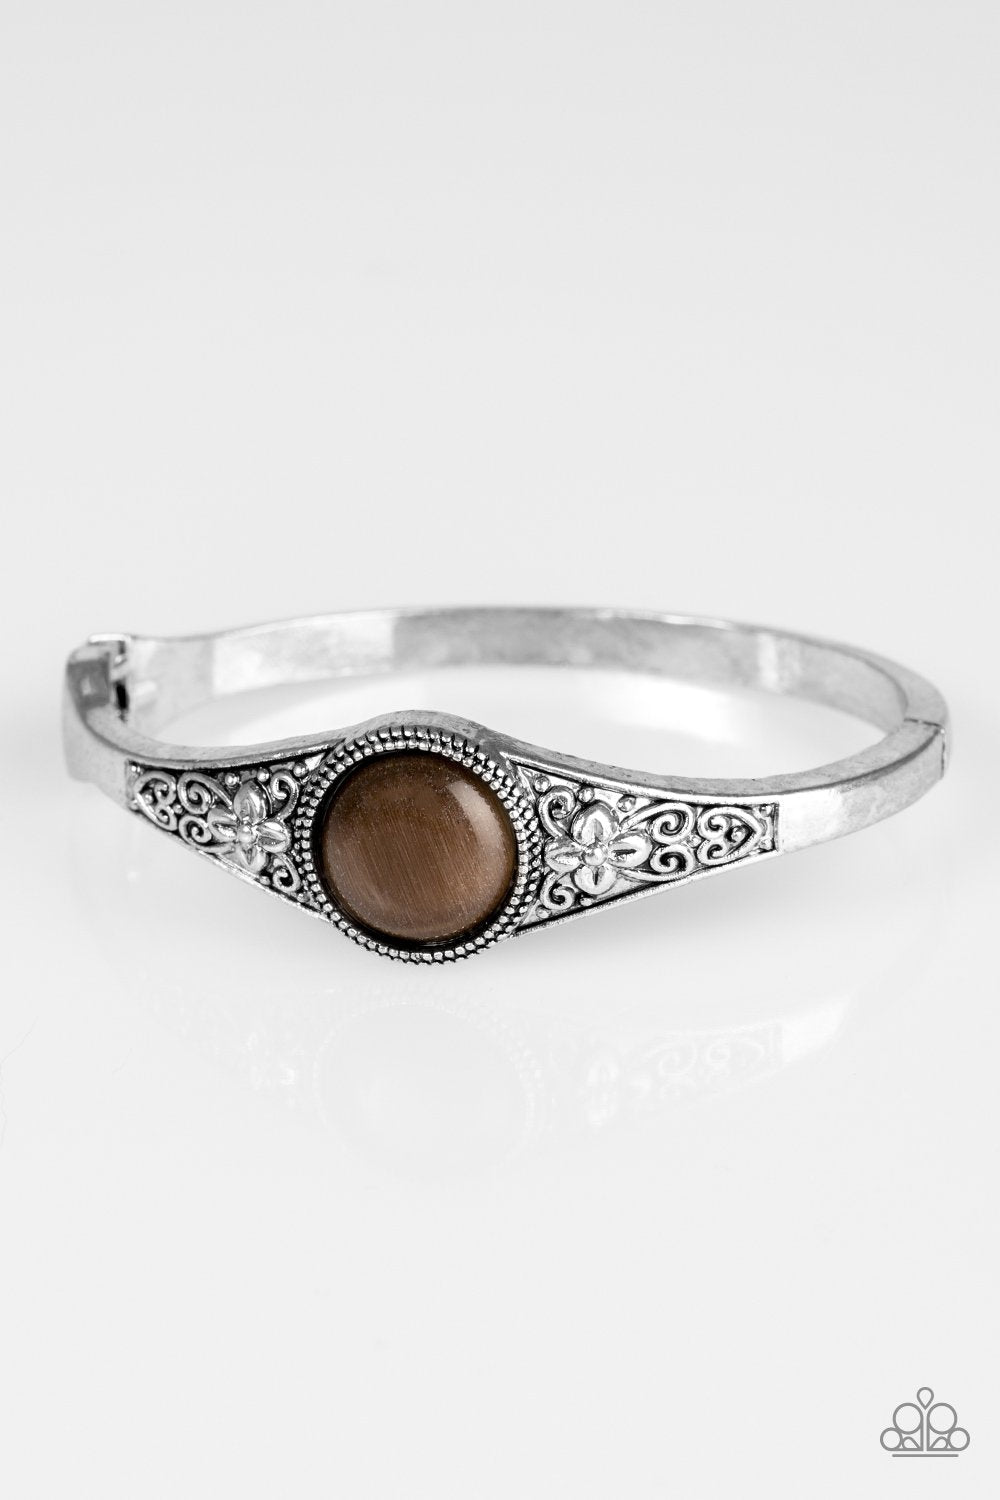 Modernly Meadow Silver and Brown Moonstone Hinged Bangle Bracelet - Paparazzi Accessories-CarasShop.com - $5 Jewelry by Cara Jewels